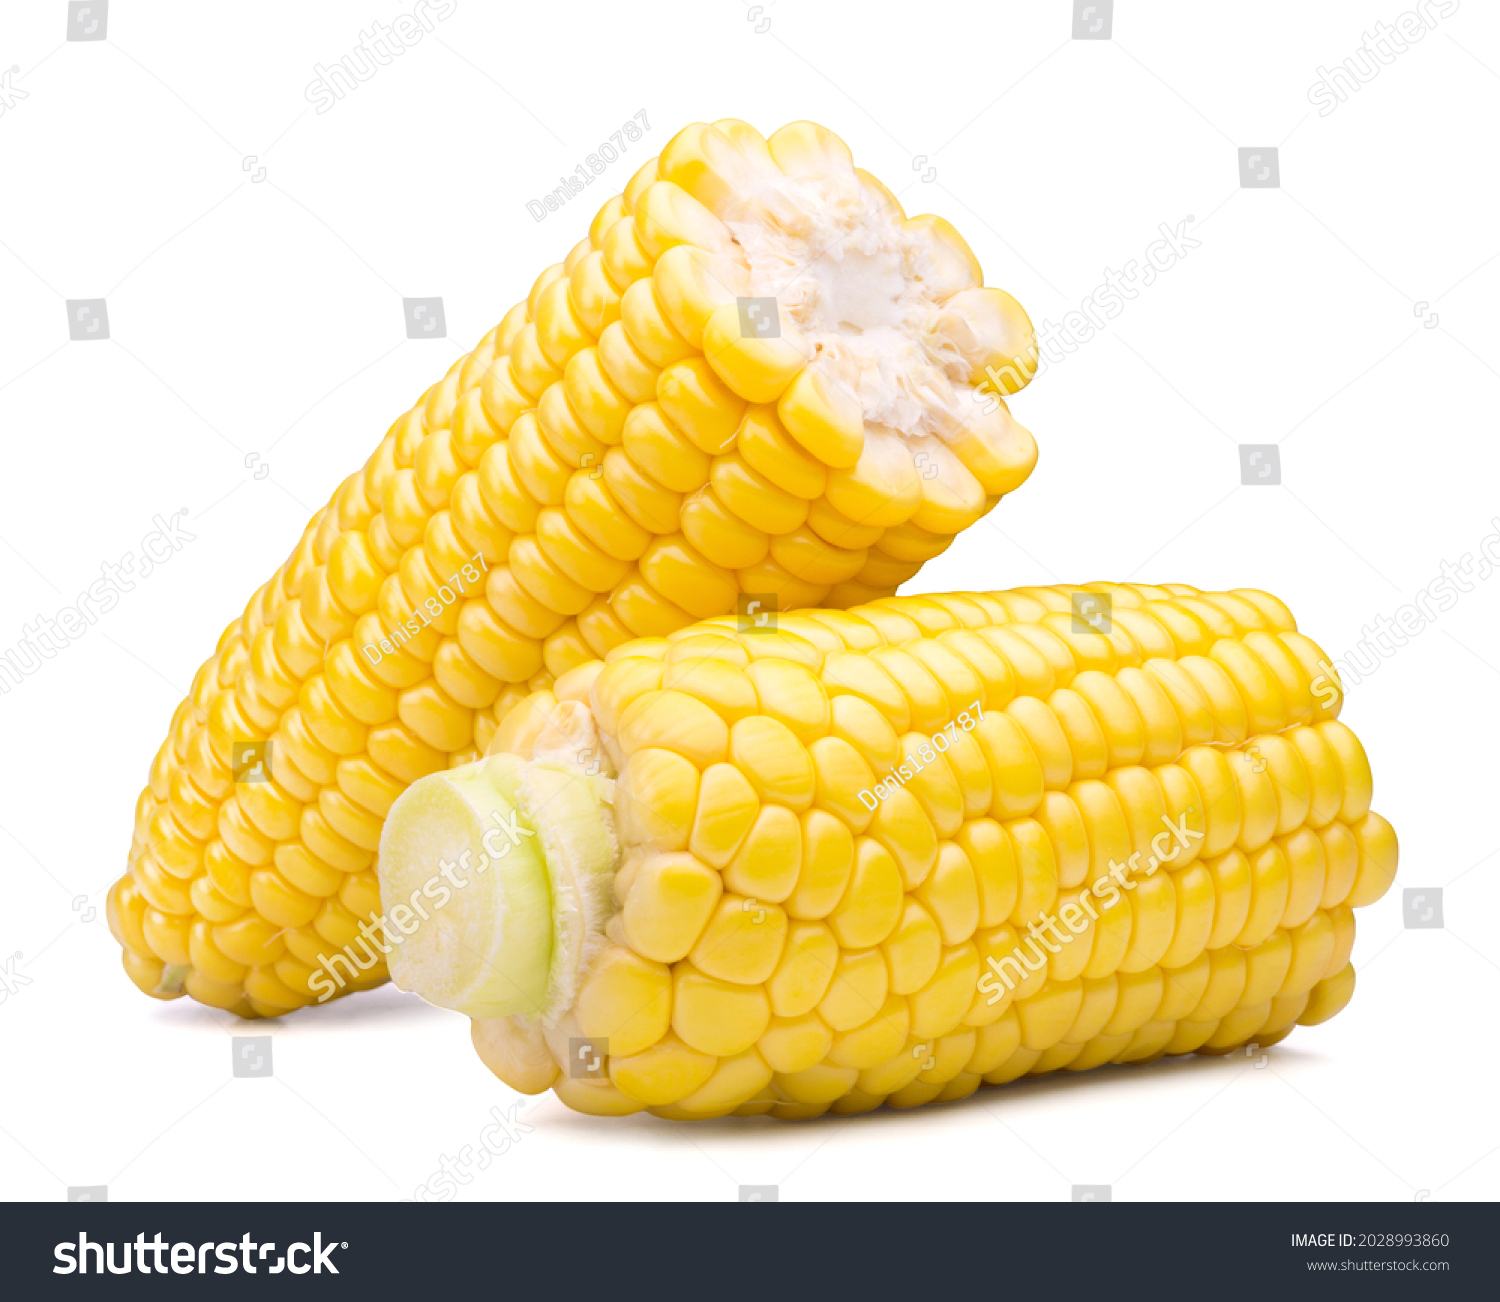 Two halves of ripe sweet corn isolated on white background. Fresh vegetable ingredients. #2028993860